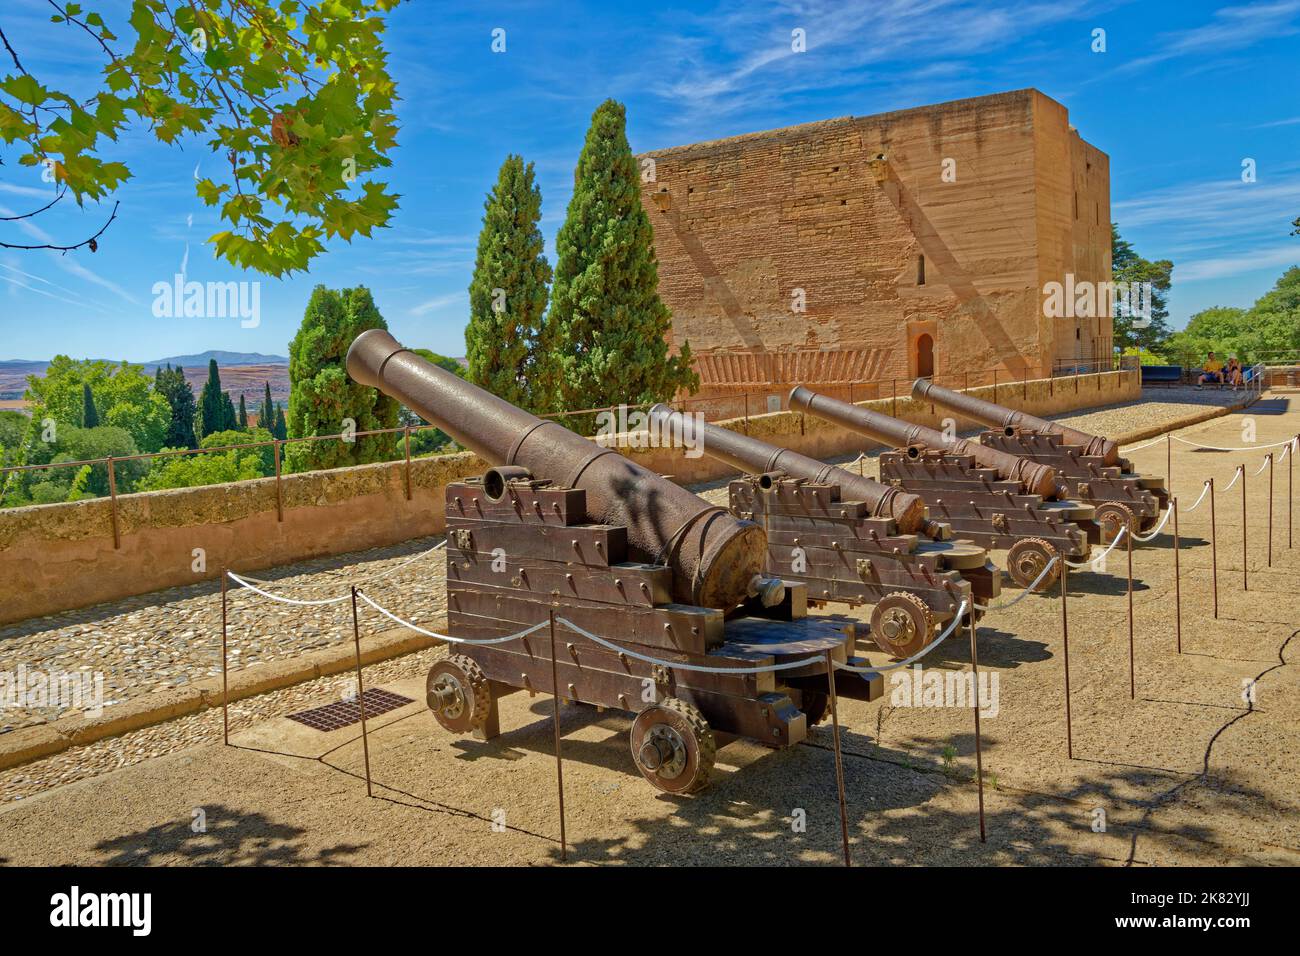 Cannons on the concourse of the Palace of Charles 5th of Spain situated within the Nasrid Palace complex at Granada, Spain. Stock Photo